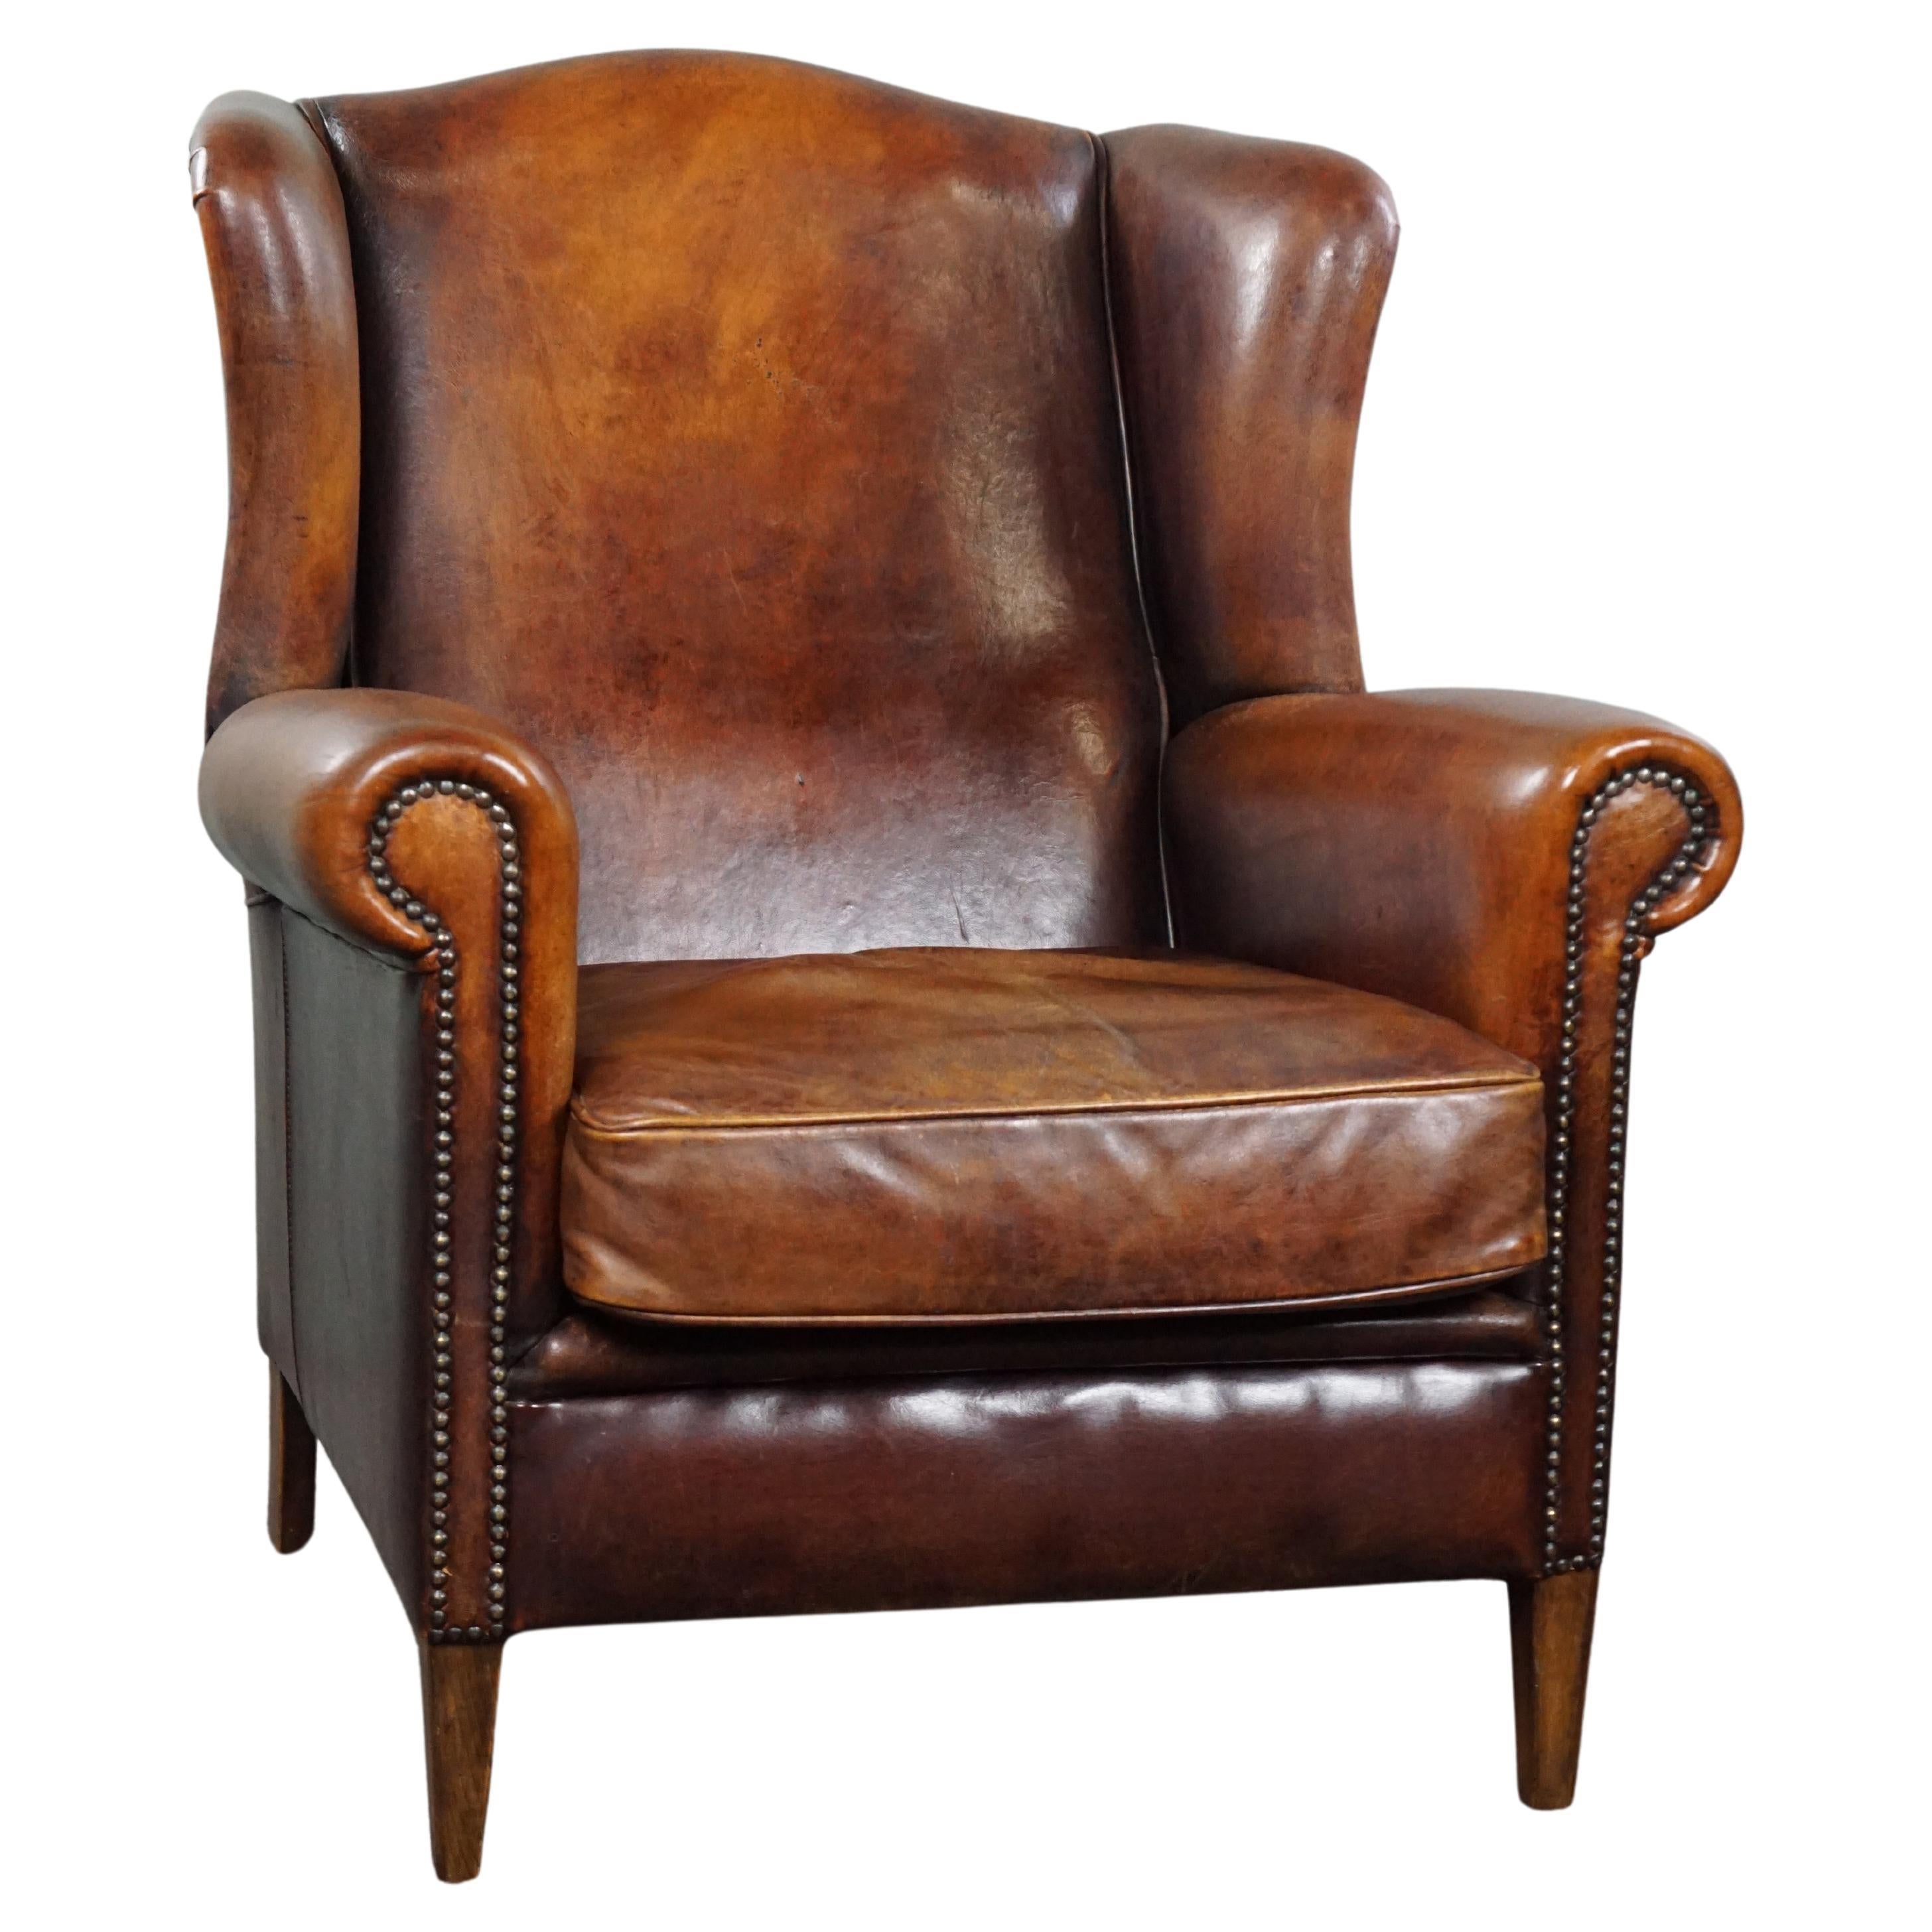 What era is a wingback chair from?